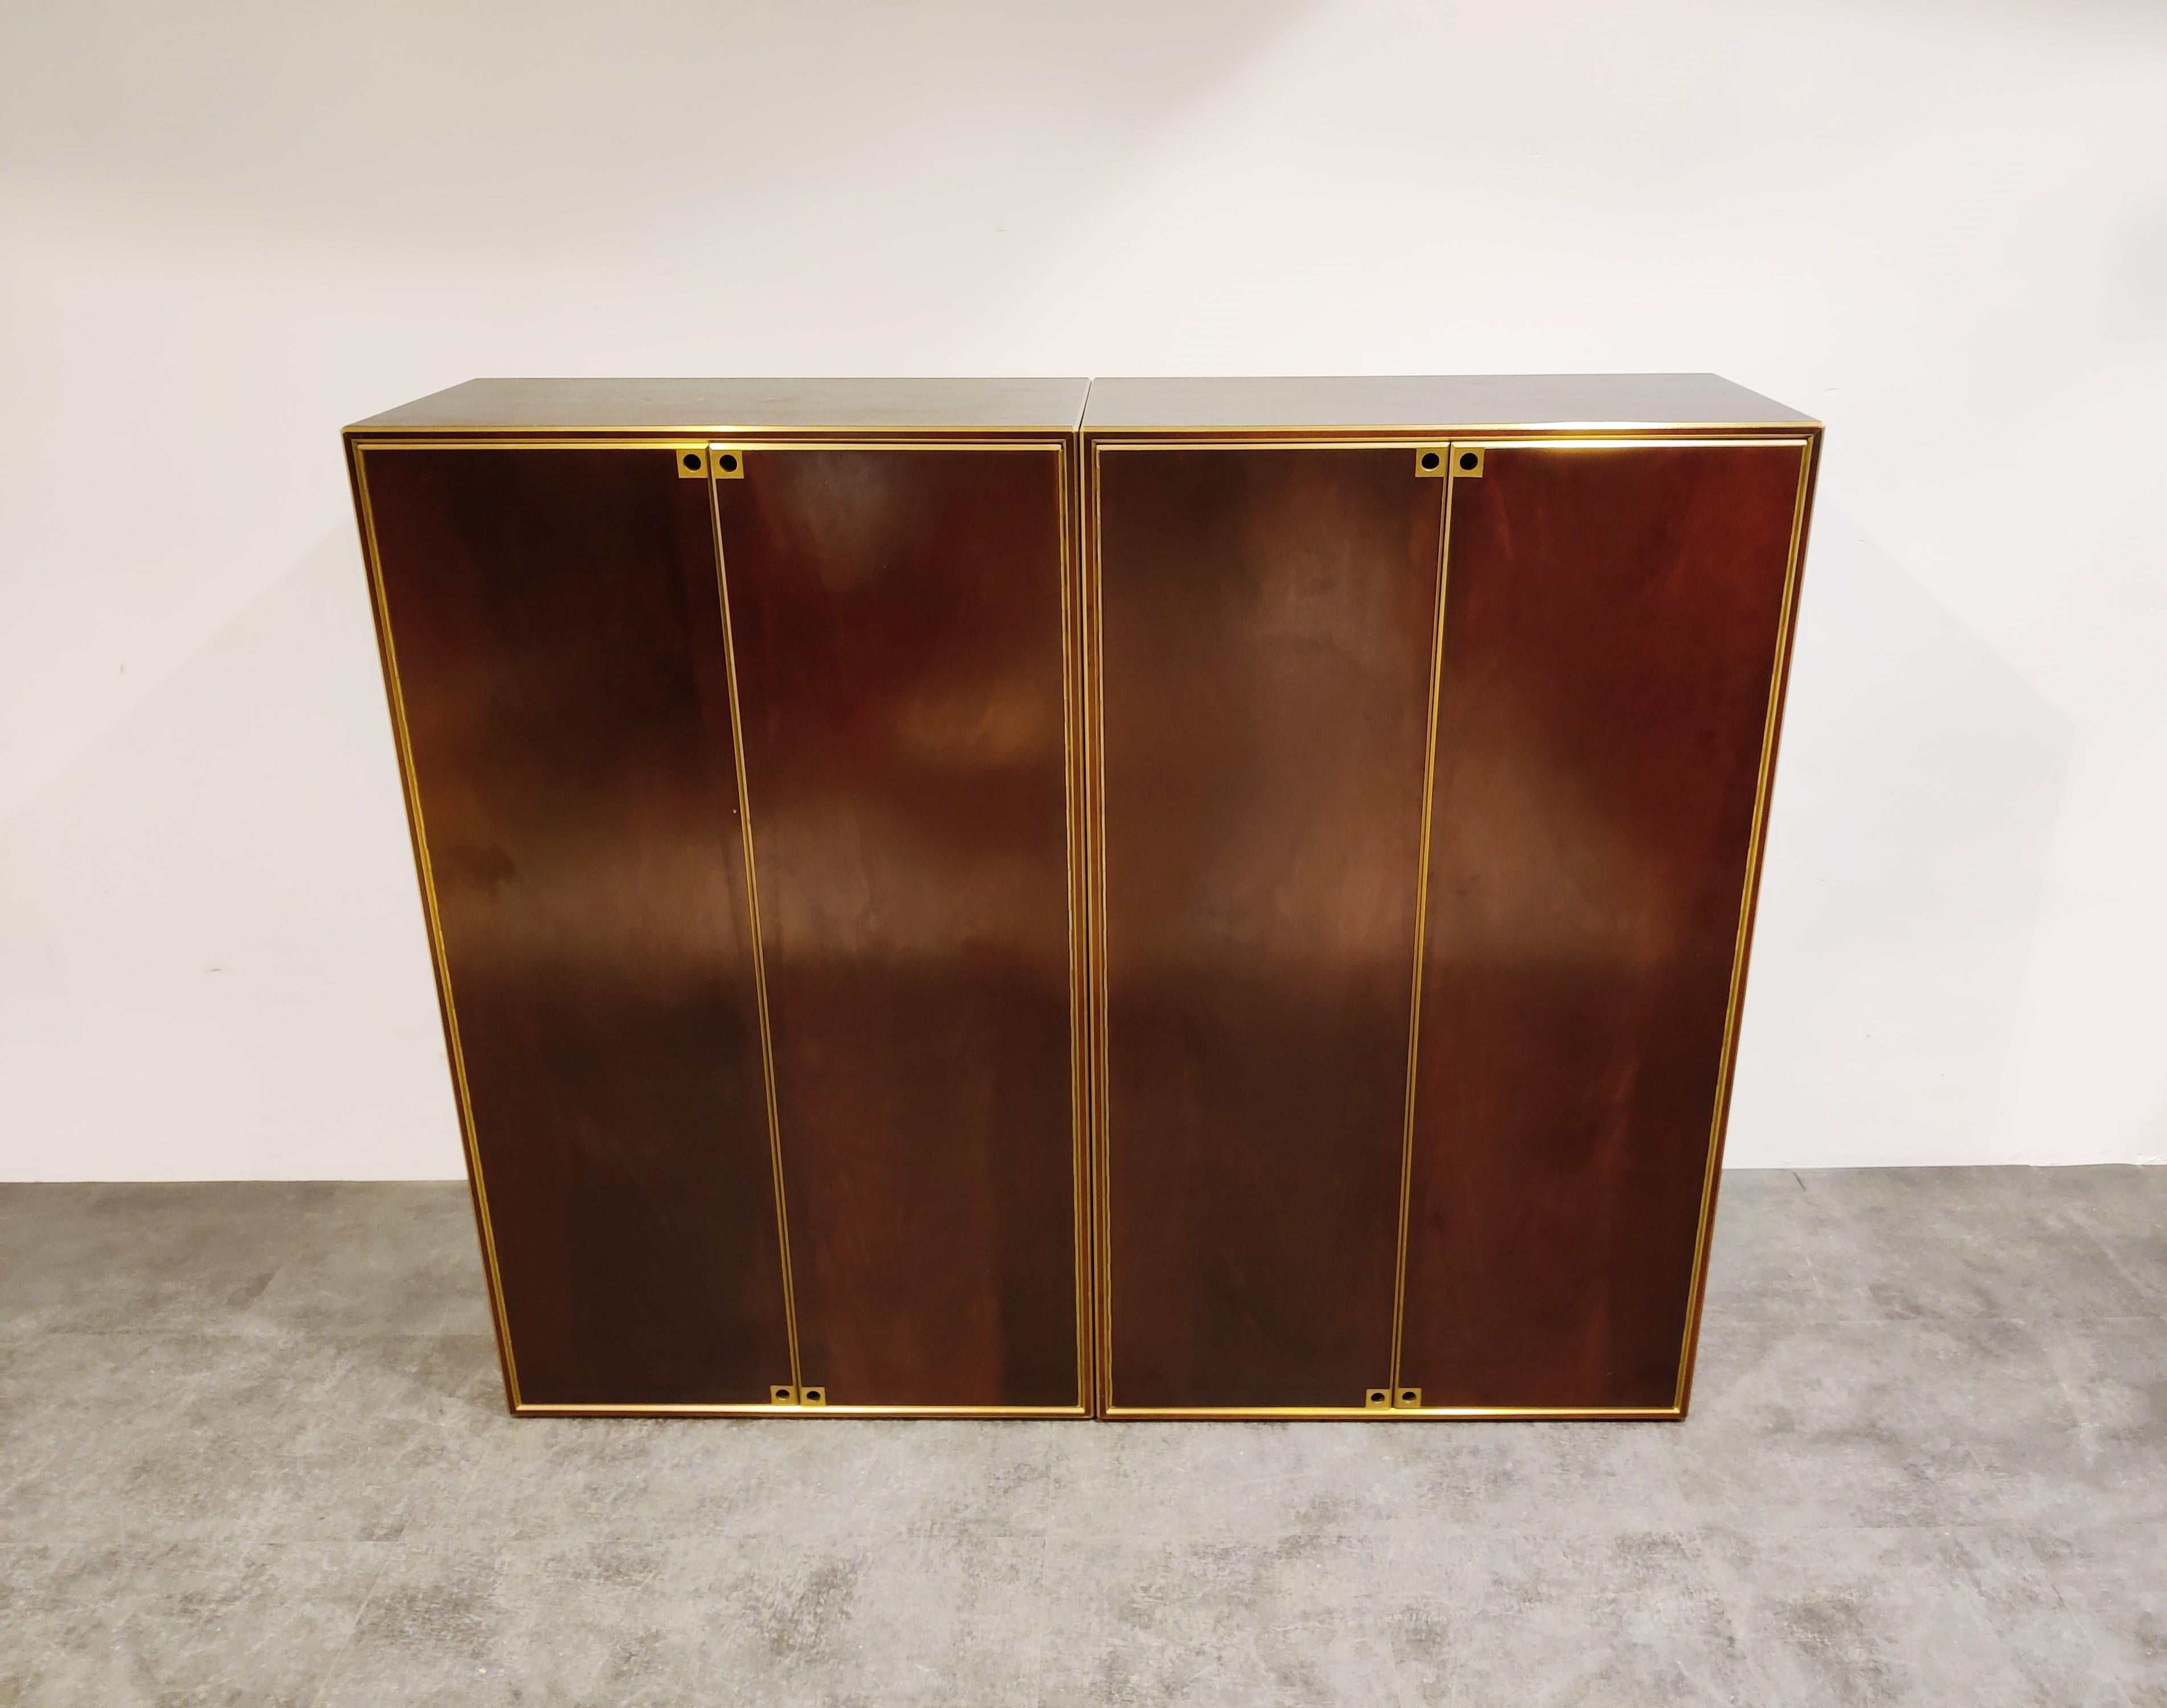 Set of 2 cabinets with wooden panels and brass by Maison Jansen.

The cabinets are very good quality with distinctive Maison Jansen handles. 

They can be used combined next to each other or separately. 

Very good condition.

1960s -